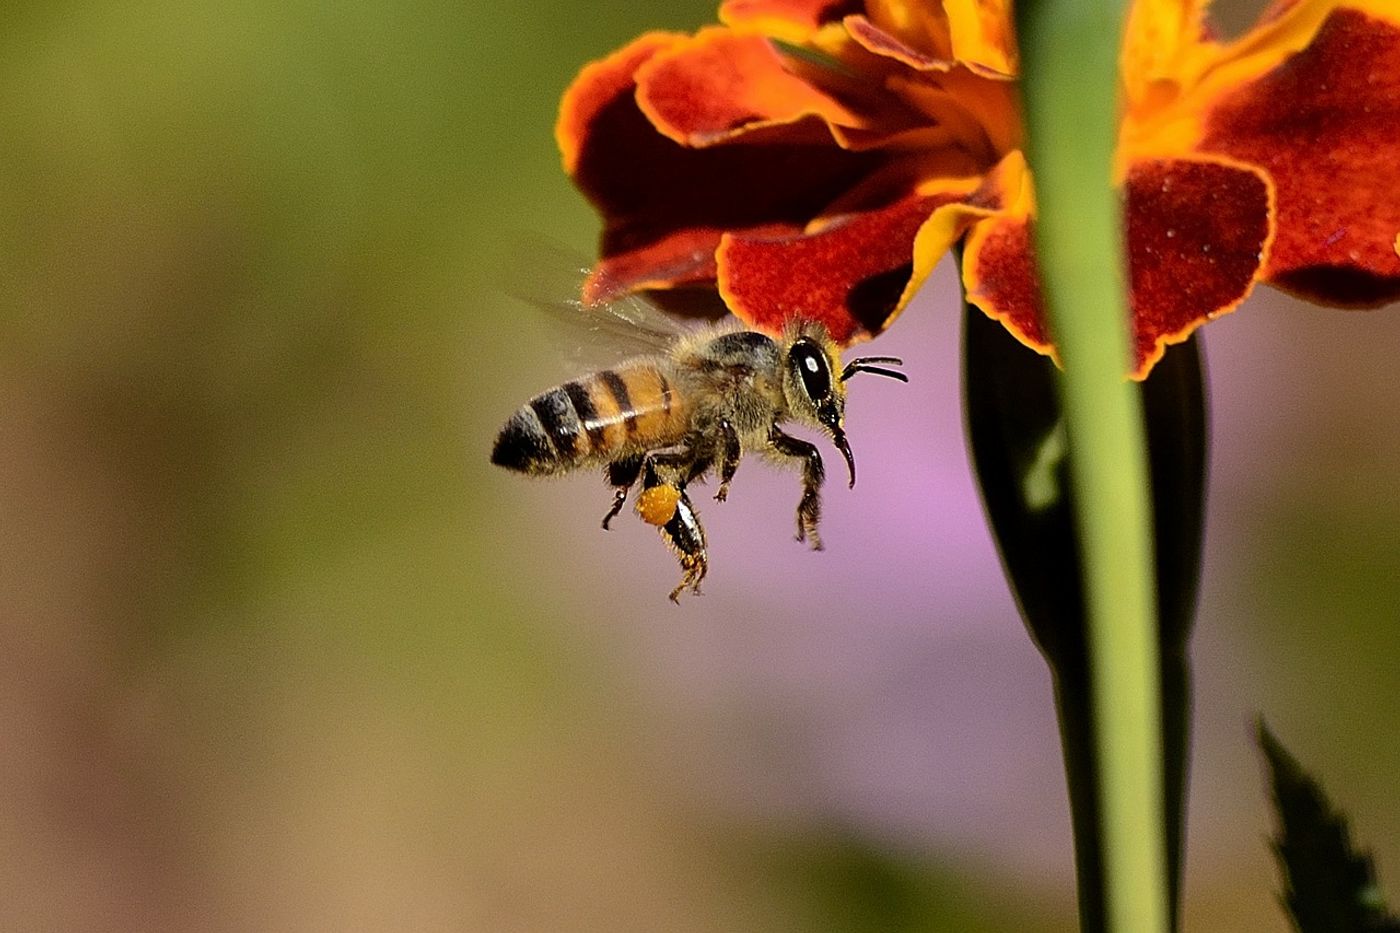 Smarter bees reportedly forage less than their dumber counterparts.